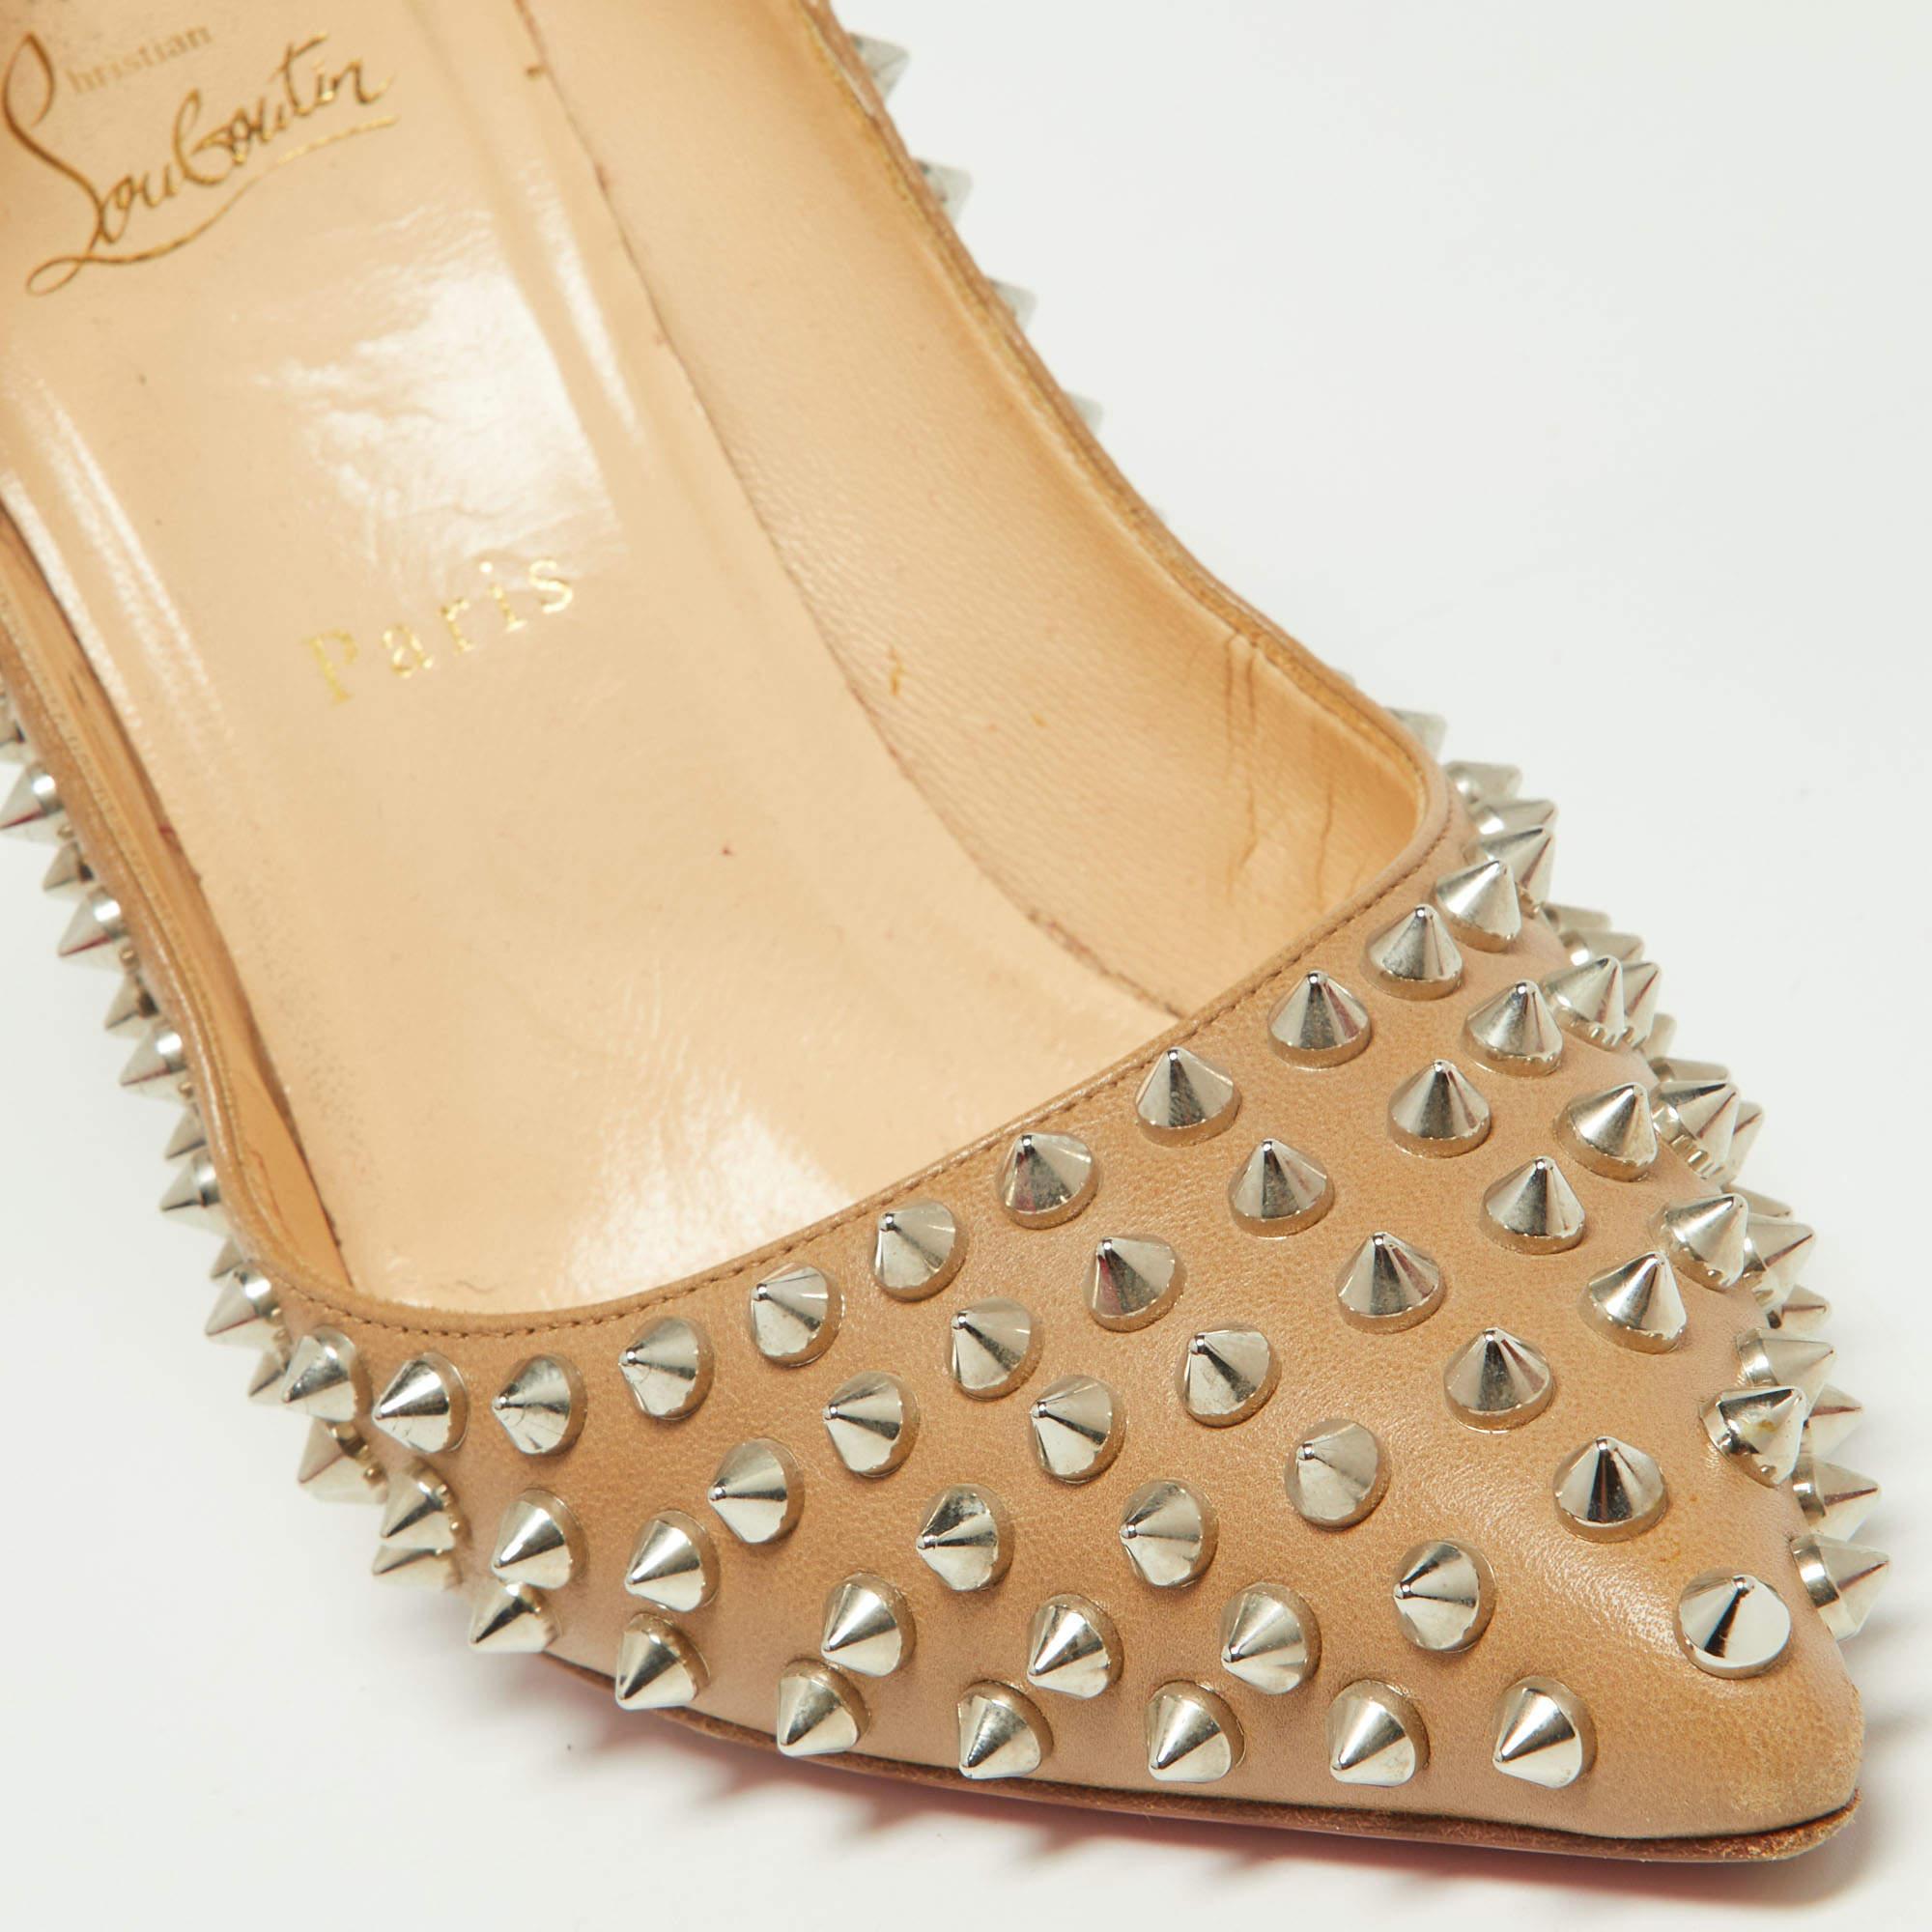 Christian Louboutin Beige Leather Pigalle Spikes Pumps Size 39.5 5